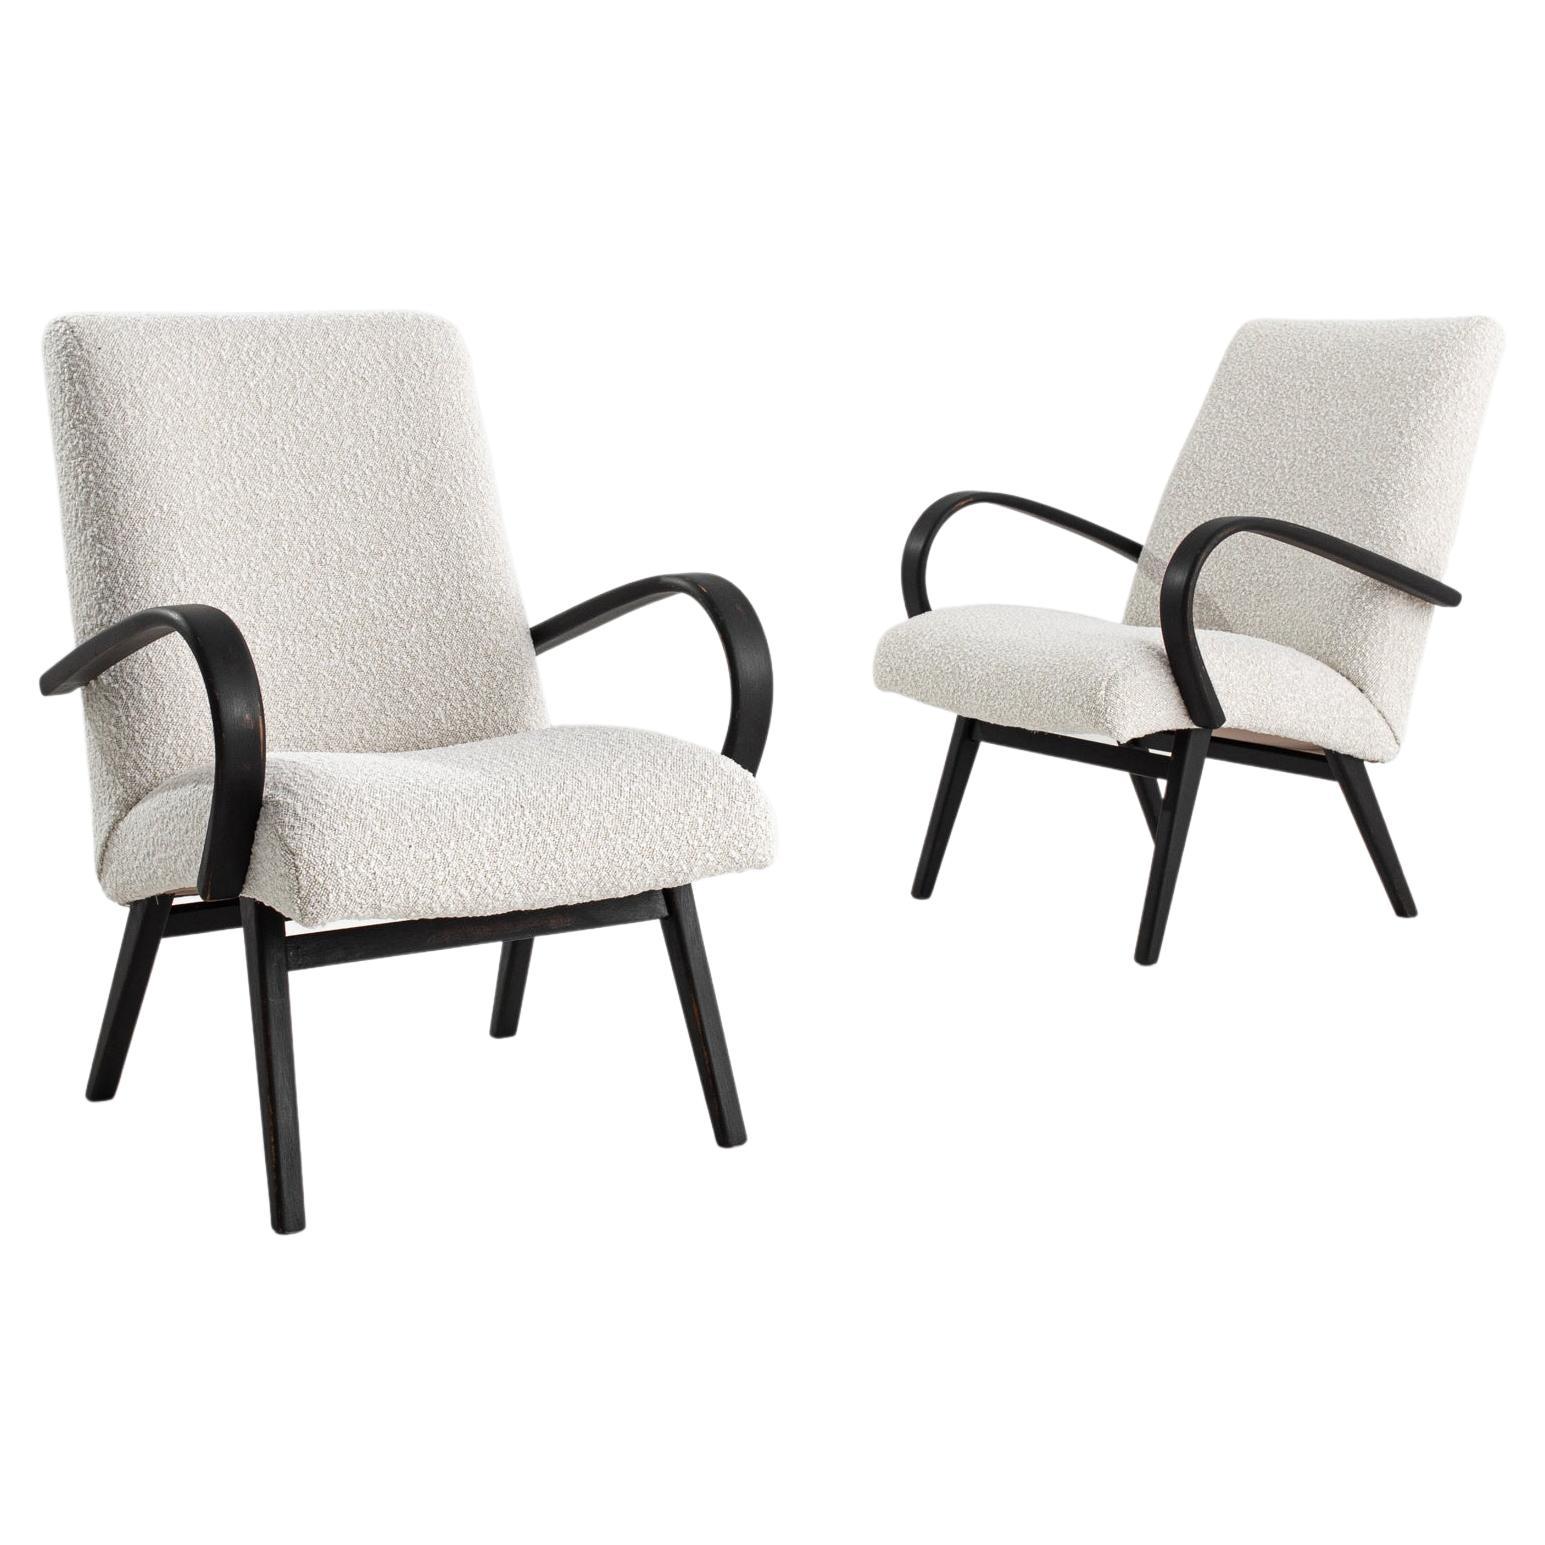 1950s Czech White Upholstered Armchairs, a Pair